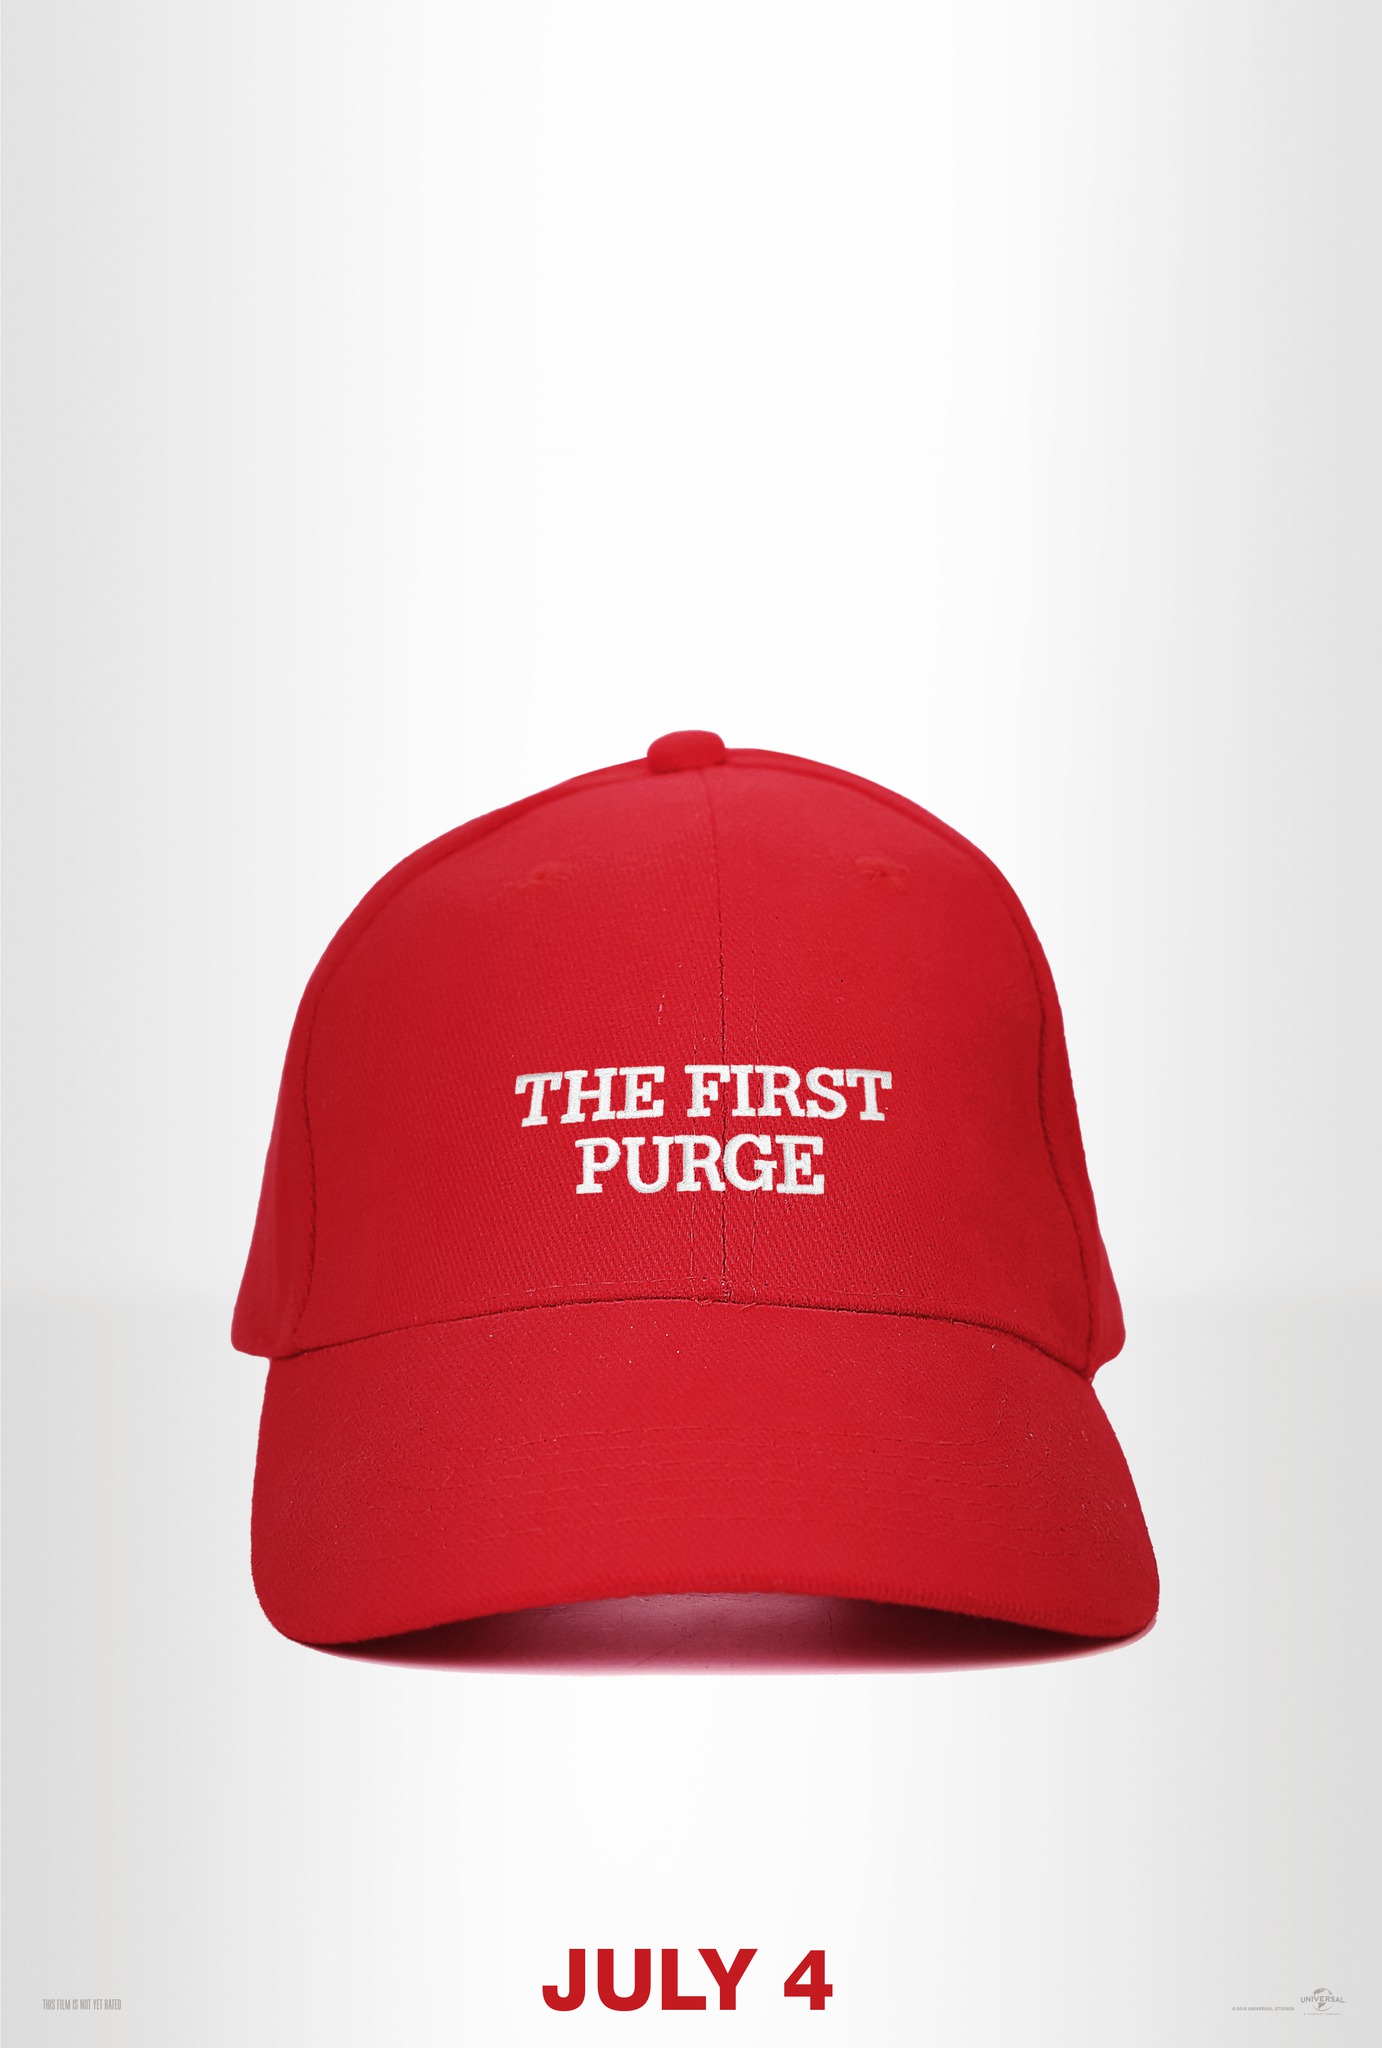 Mega Sized Movie Poster Image for The First Purge (#1 of 12)